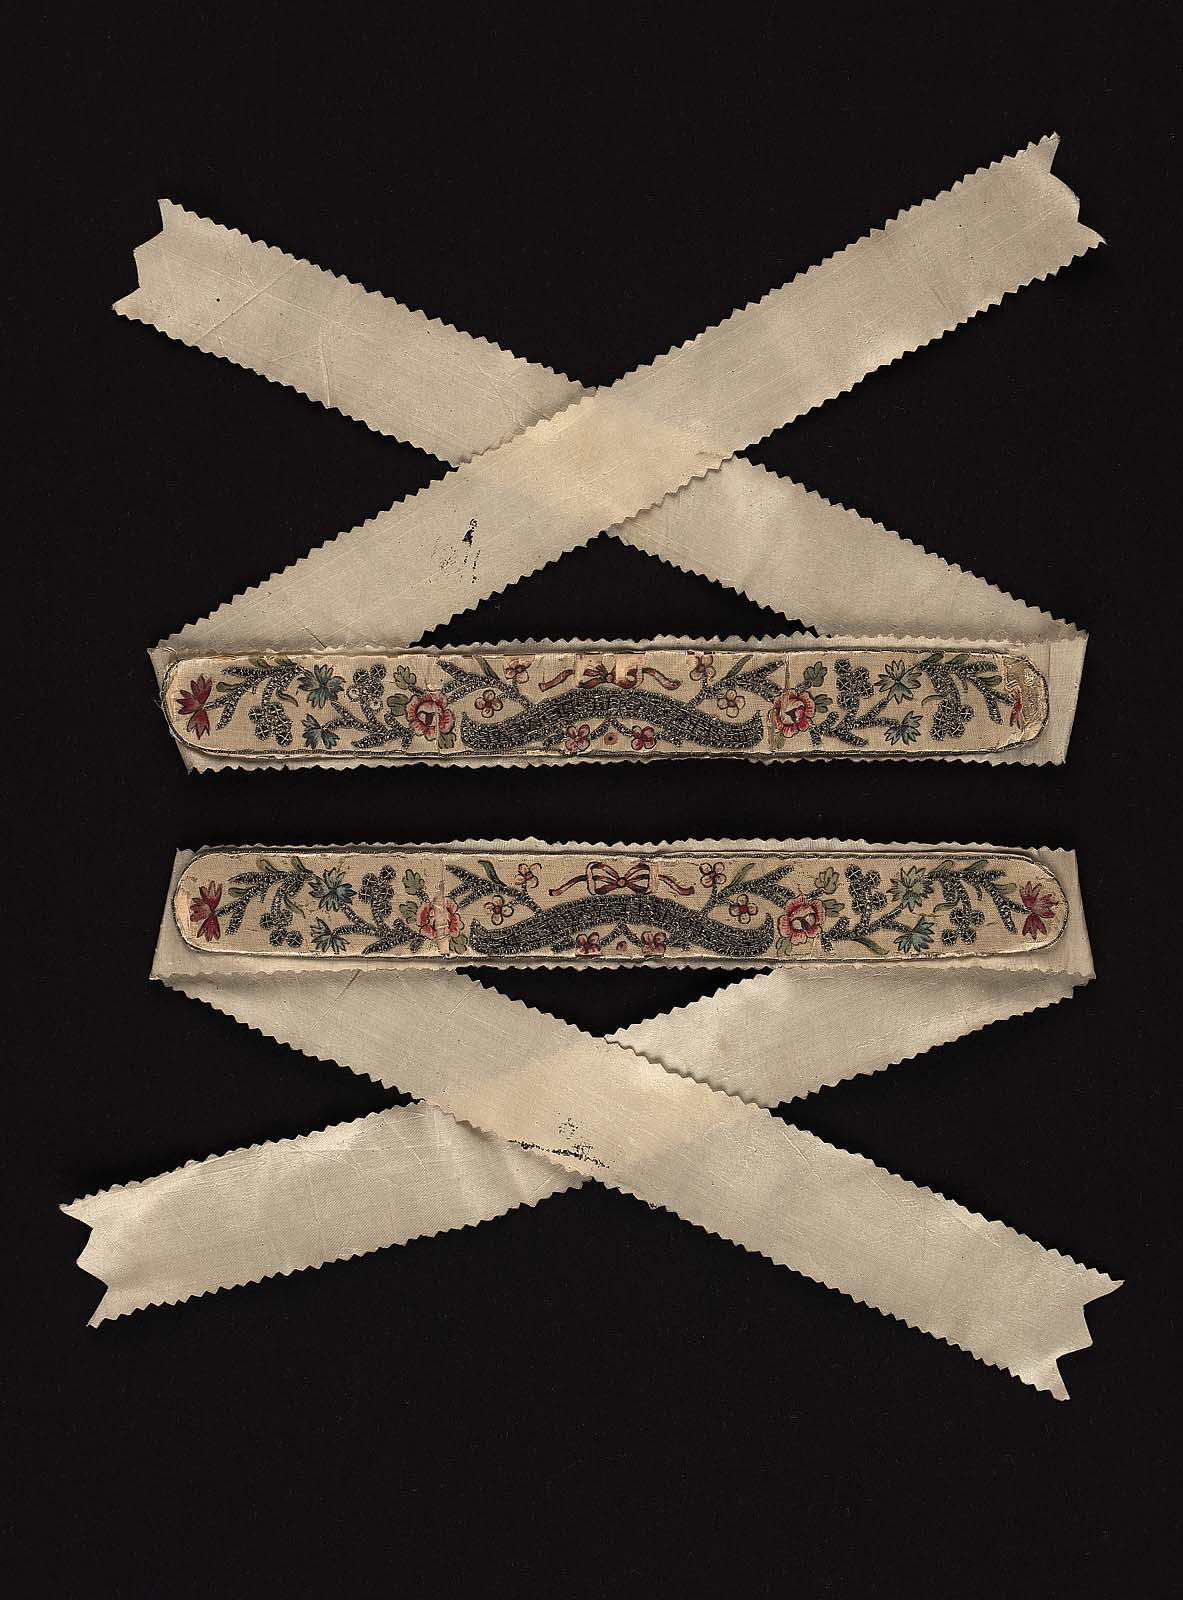 French Garter (one of a pair) 18th century, Museum of Fine Arts Boston